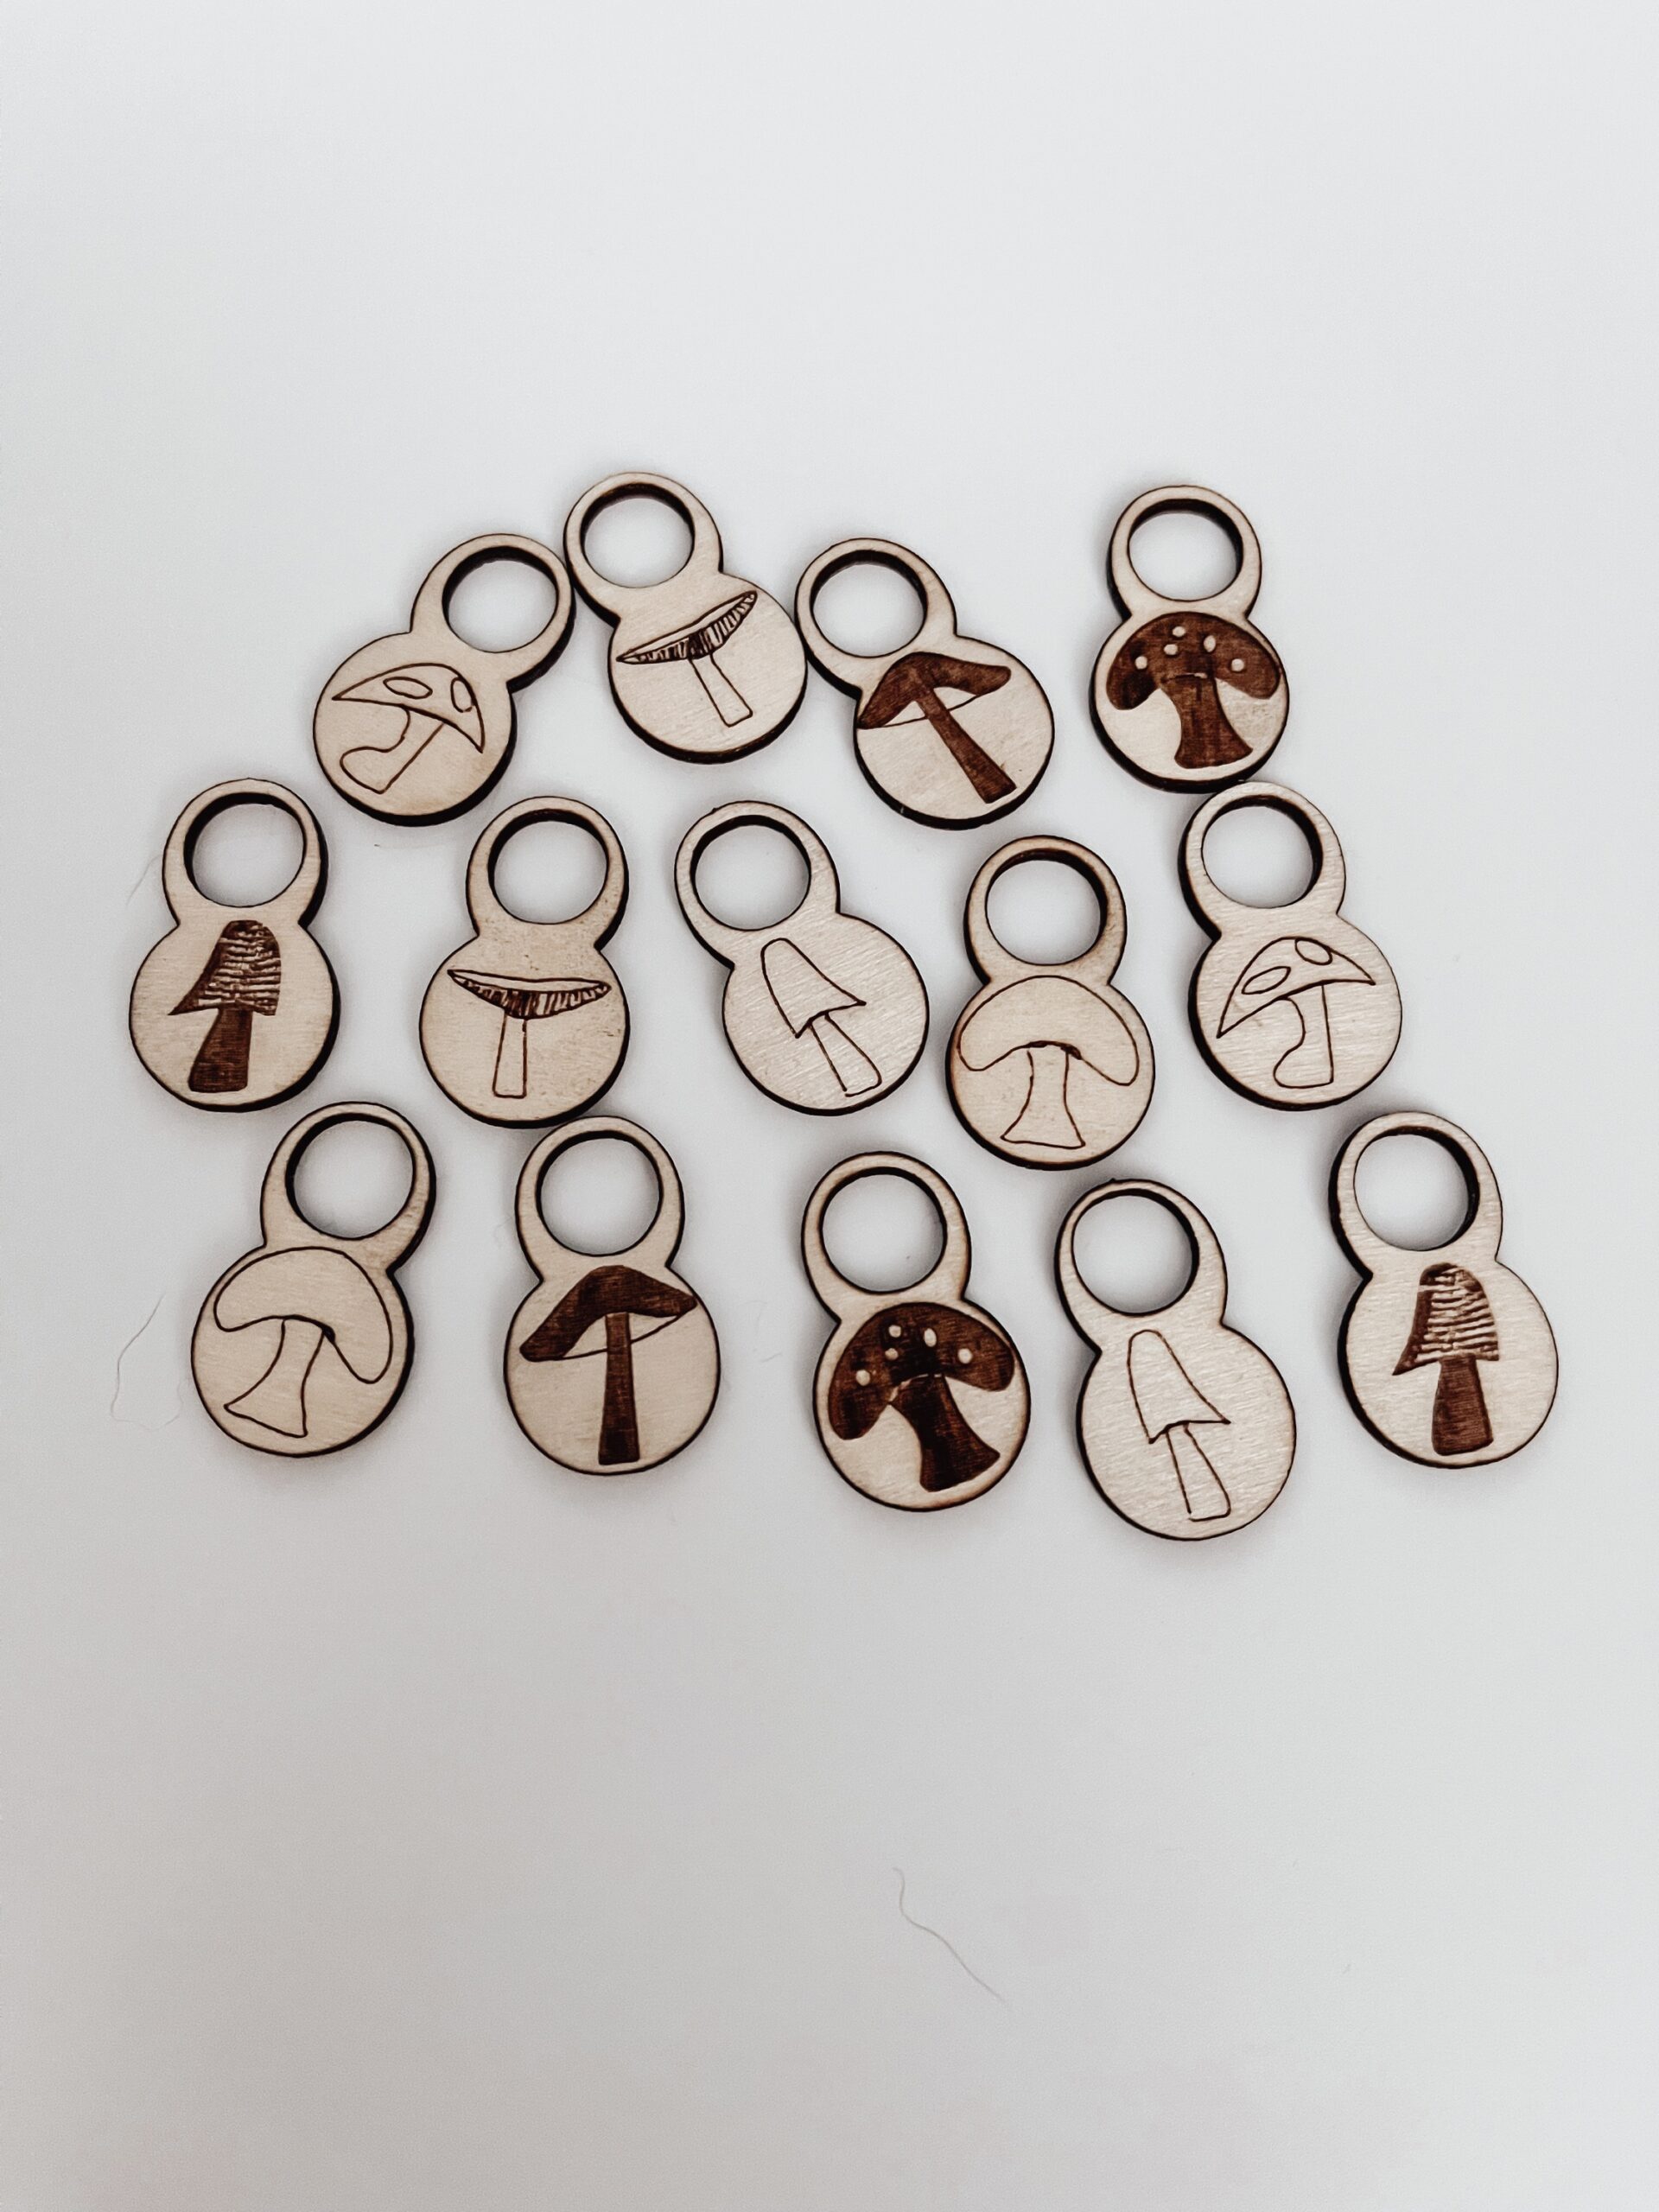 A total of 14 wood stitch markers with a variety of hand-drawn mushroom designs are displayed on a white background.